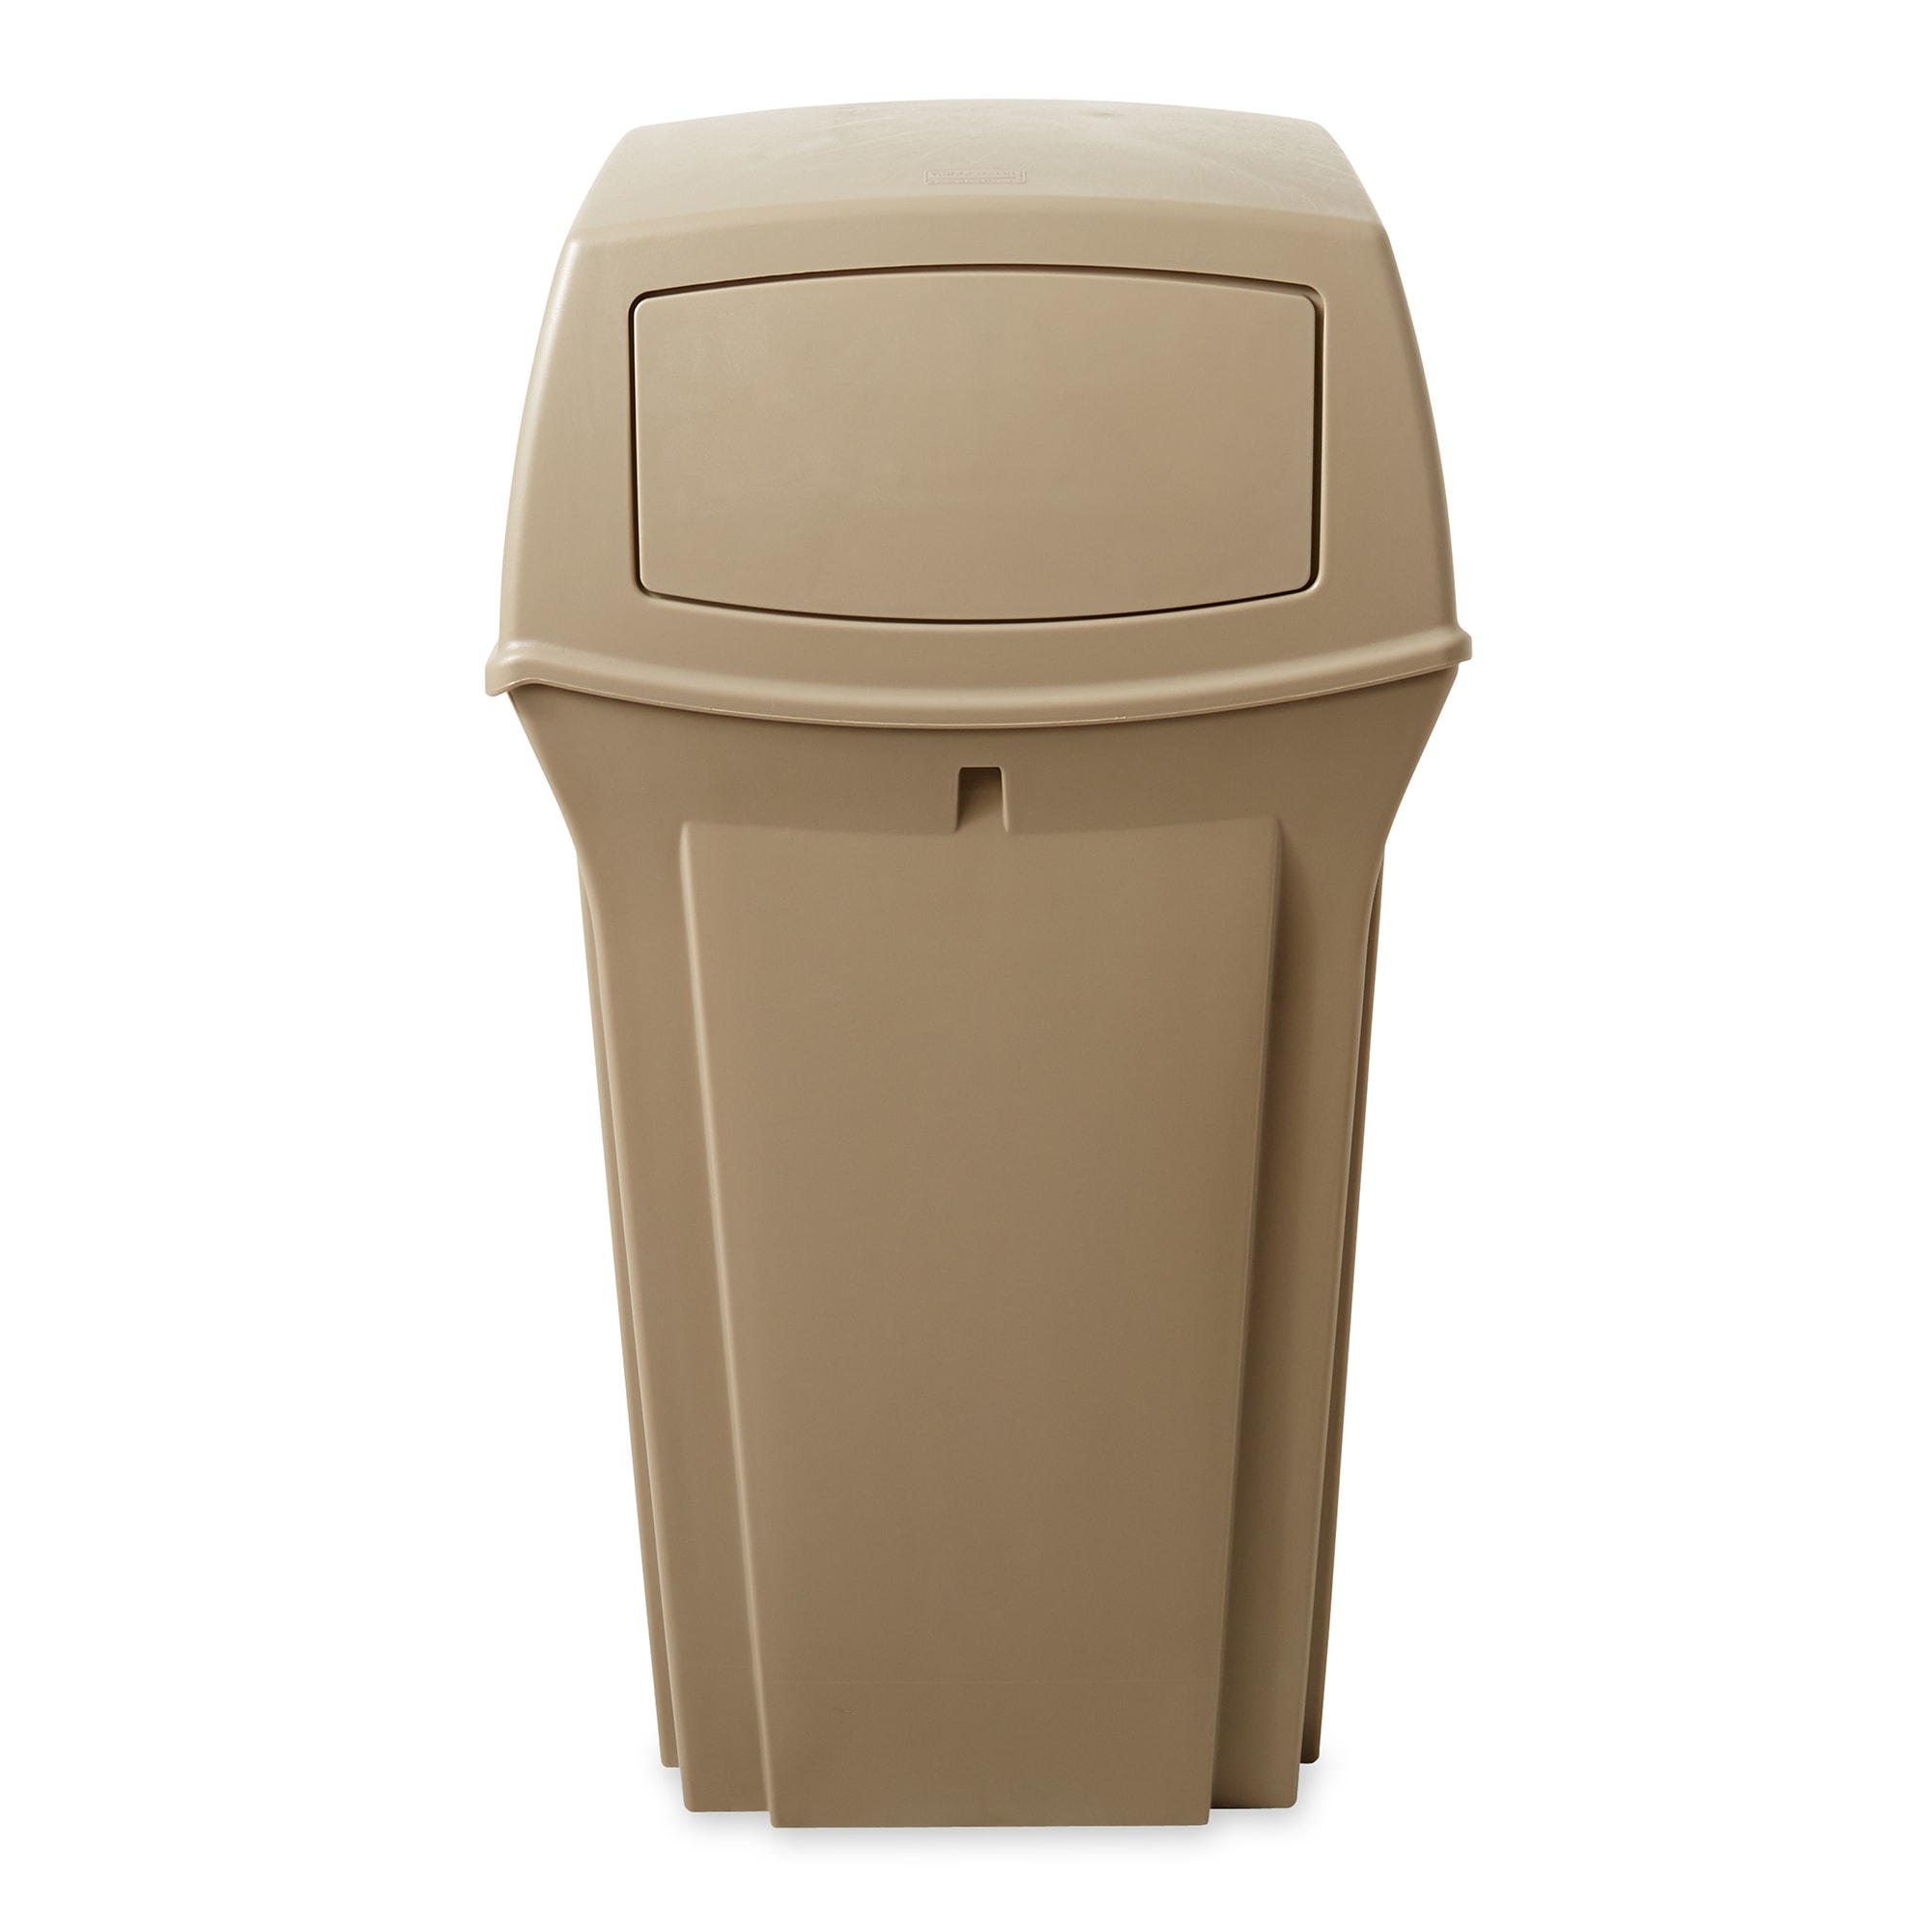 Outdoor Waste Containers